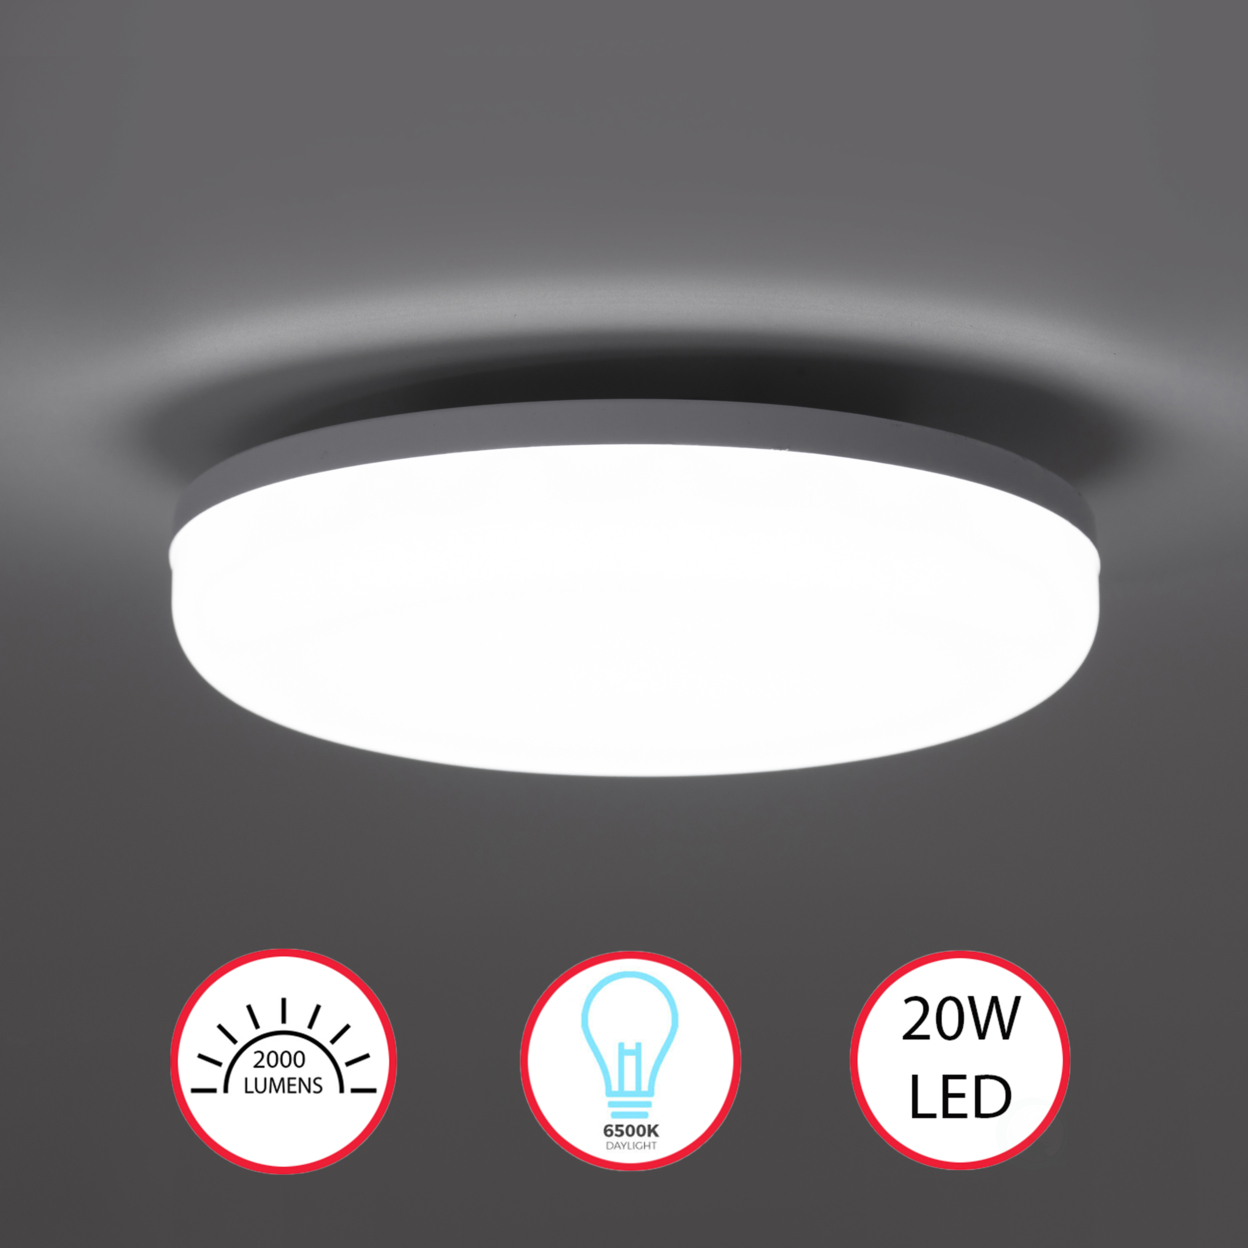 White Plastic 6 In Round LED Ceiling Light Fixture For Entryway, Office, Outdoor, 6500K Daylight, 2000lm 20W